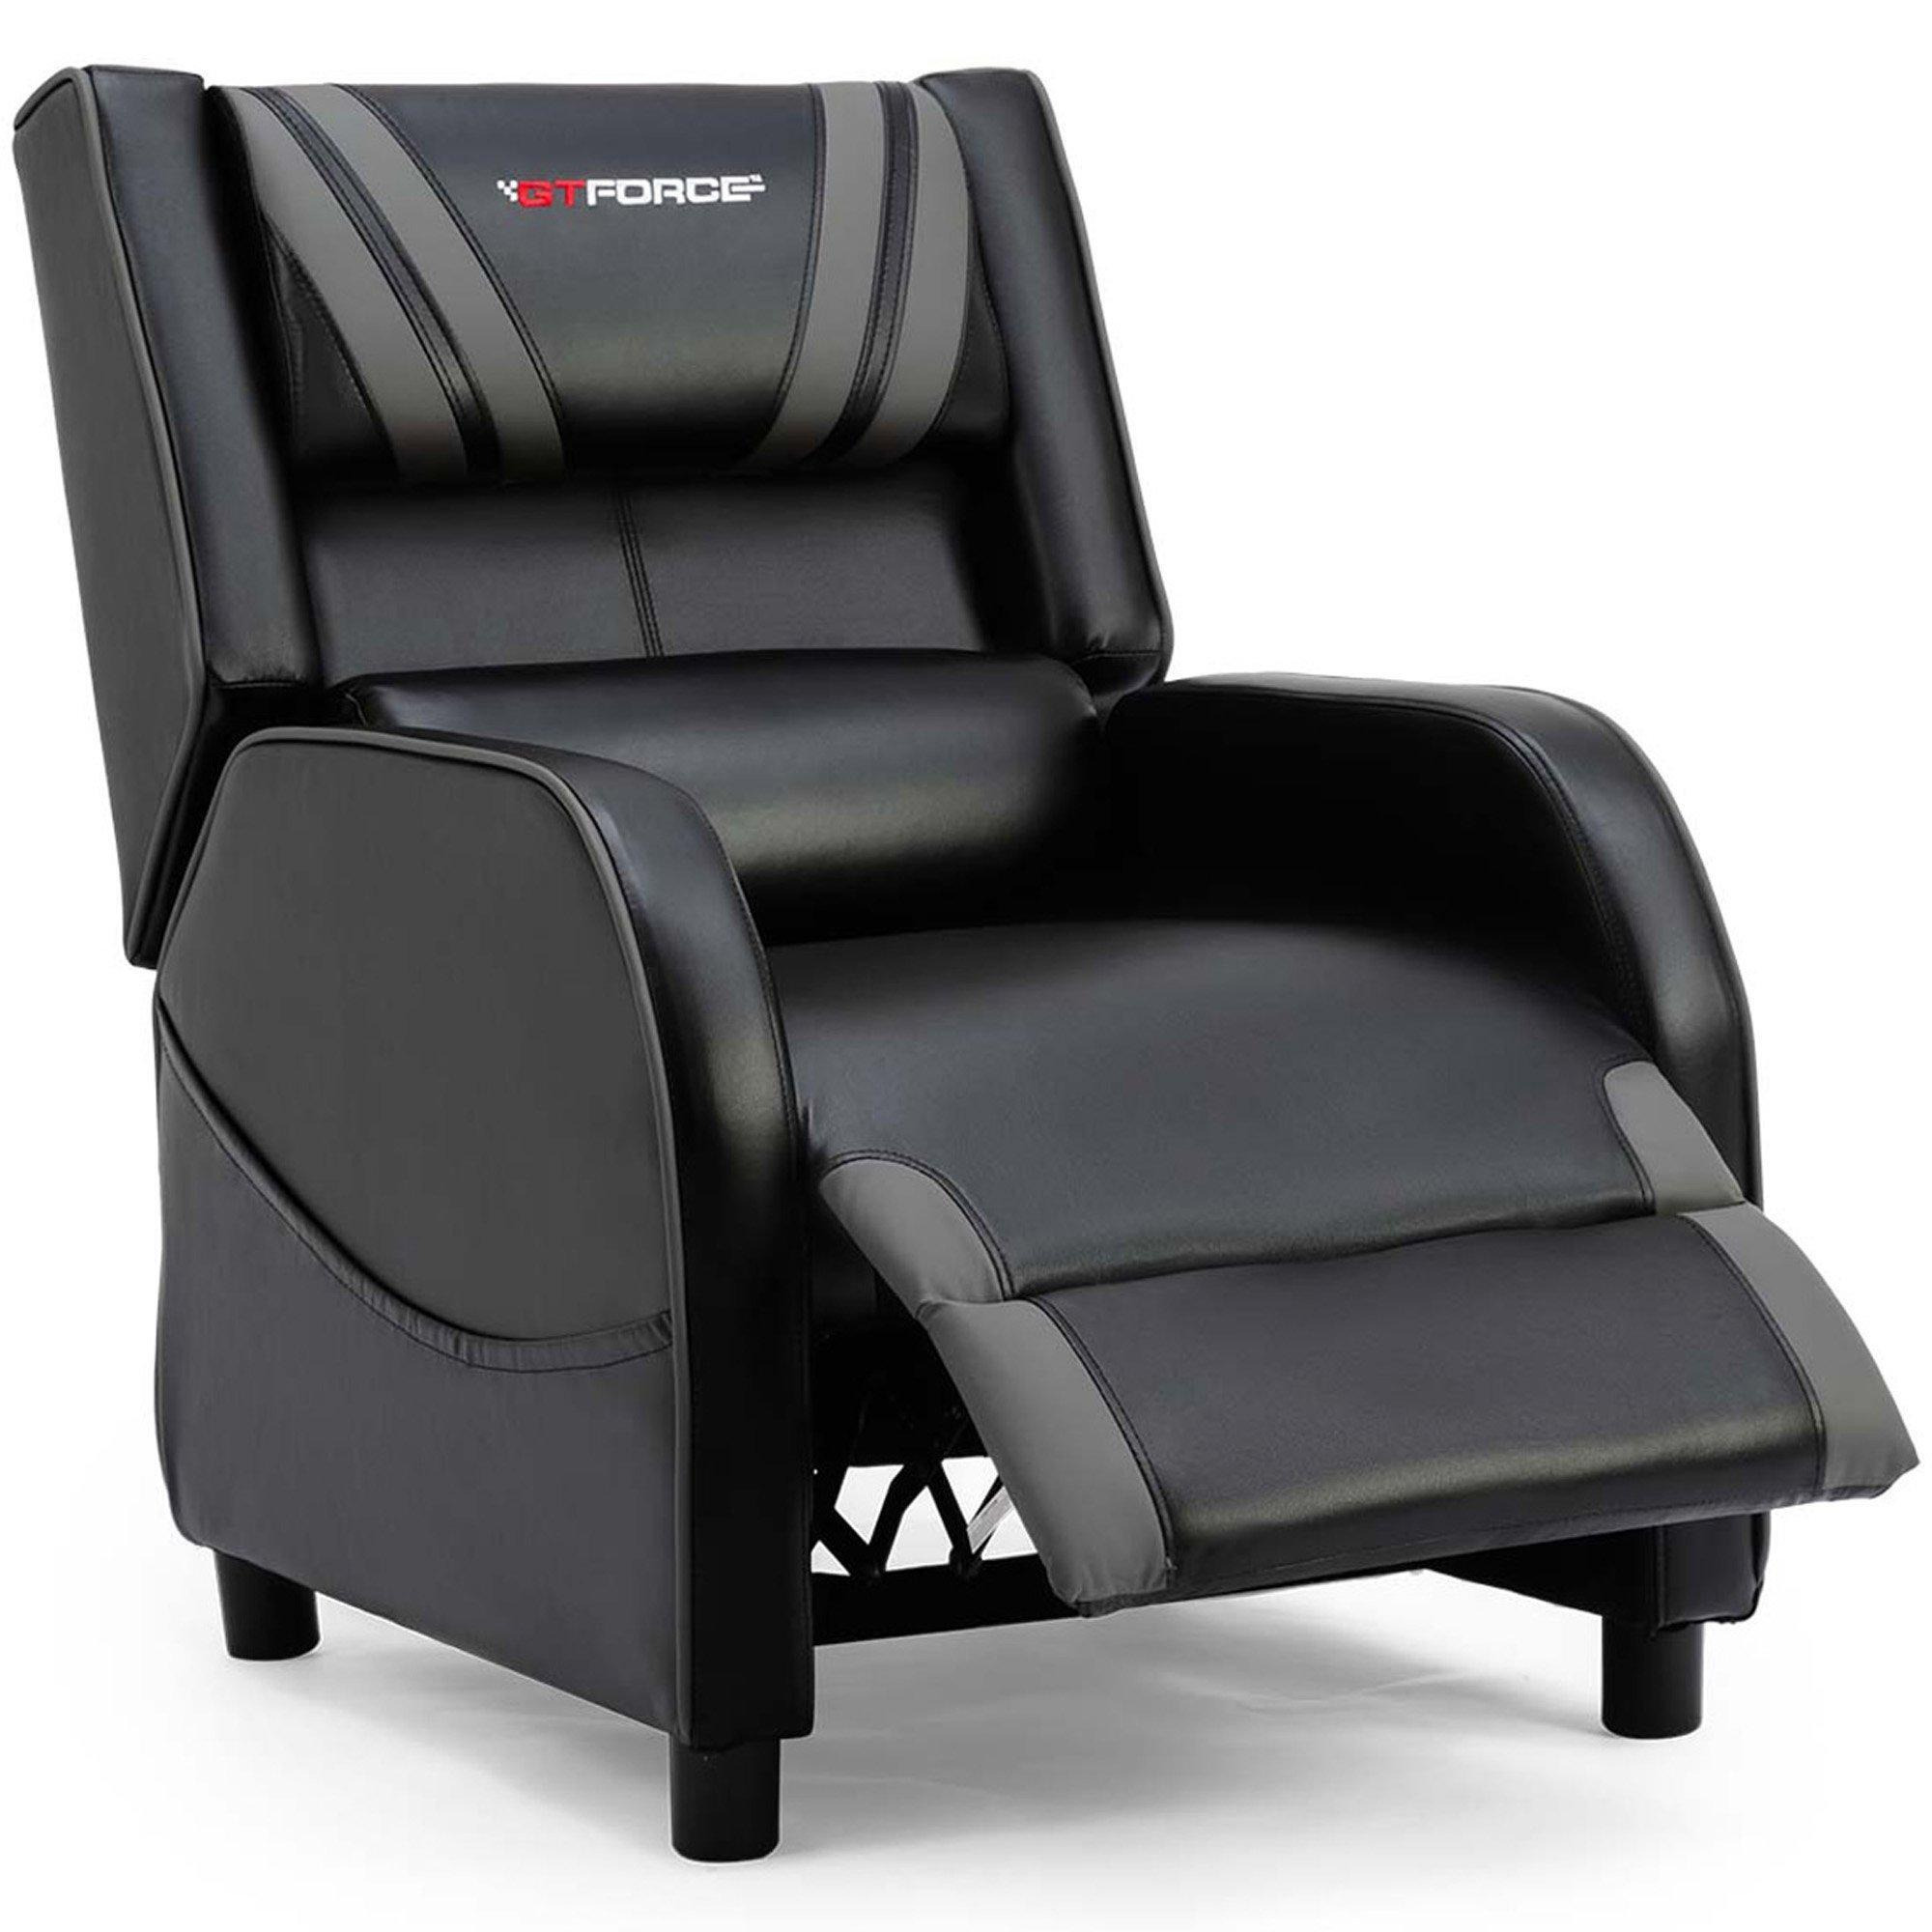 Ranger S Faux Leather Recliner Armchair Sofa Cinema Gaming Chair - image 1